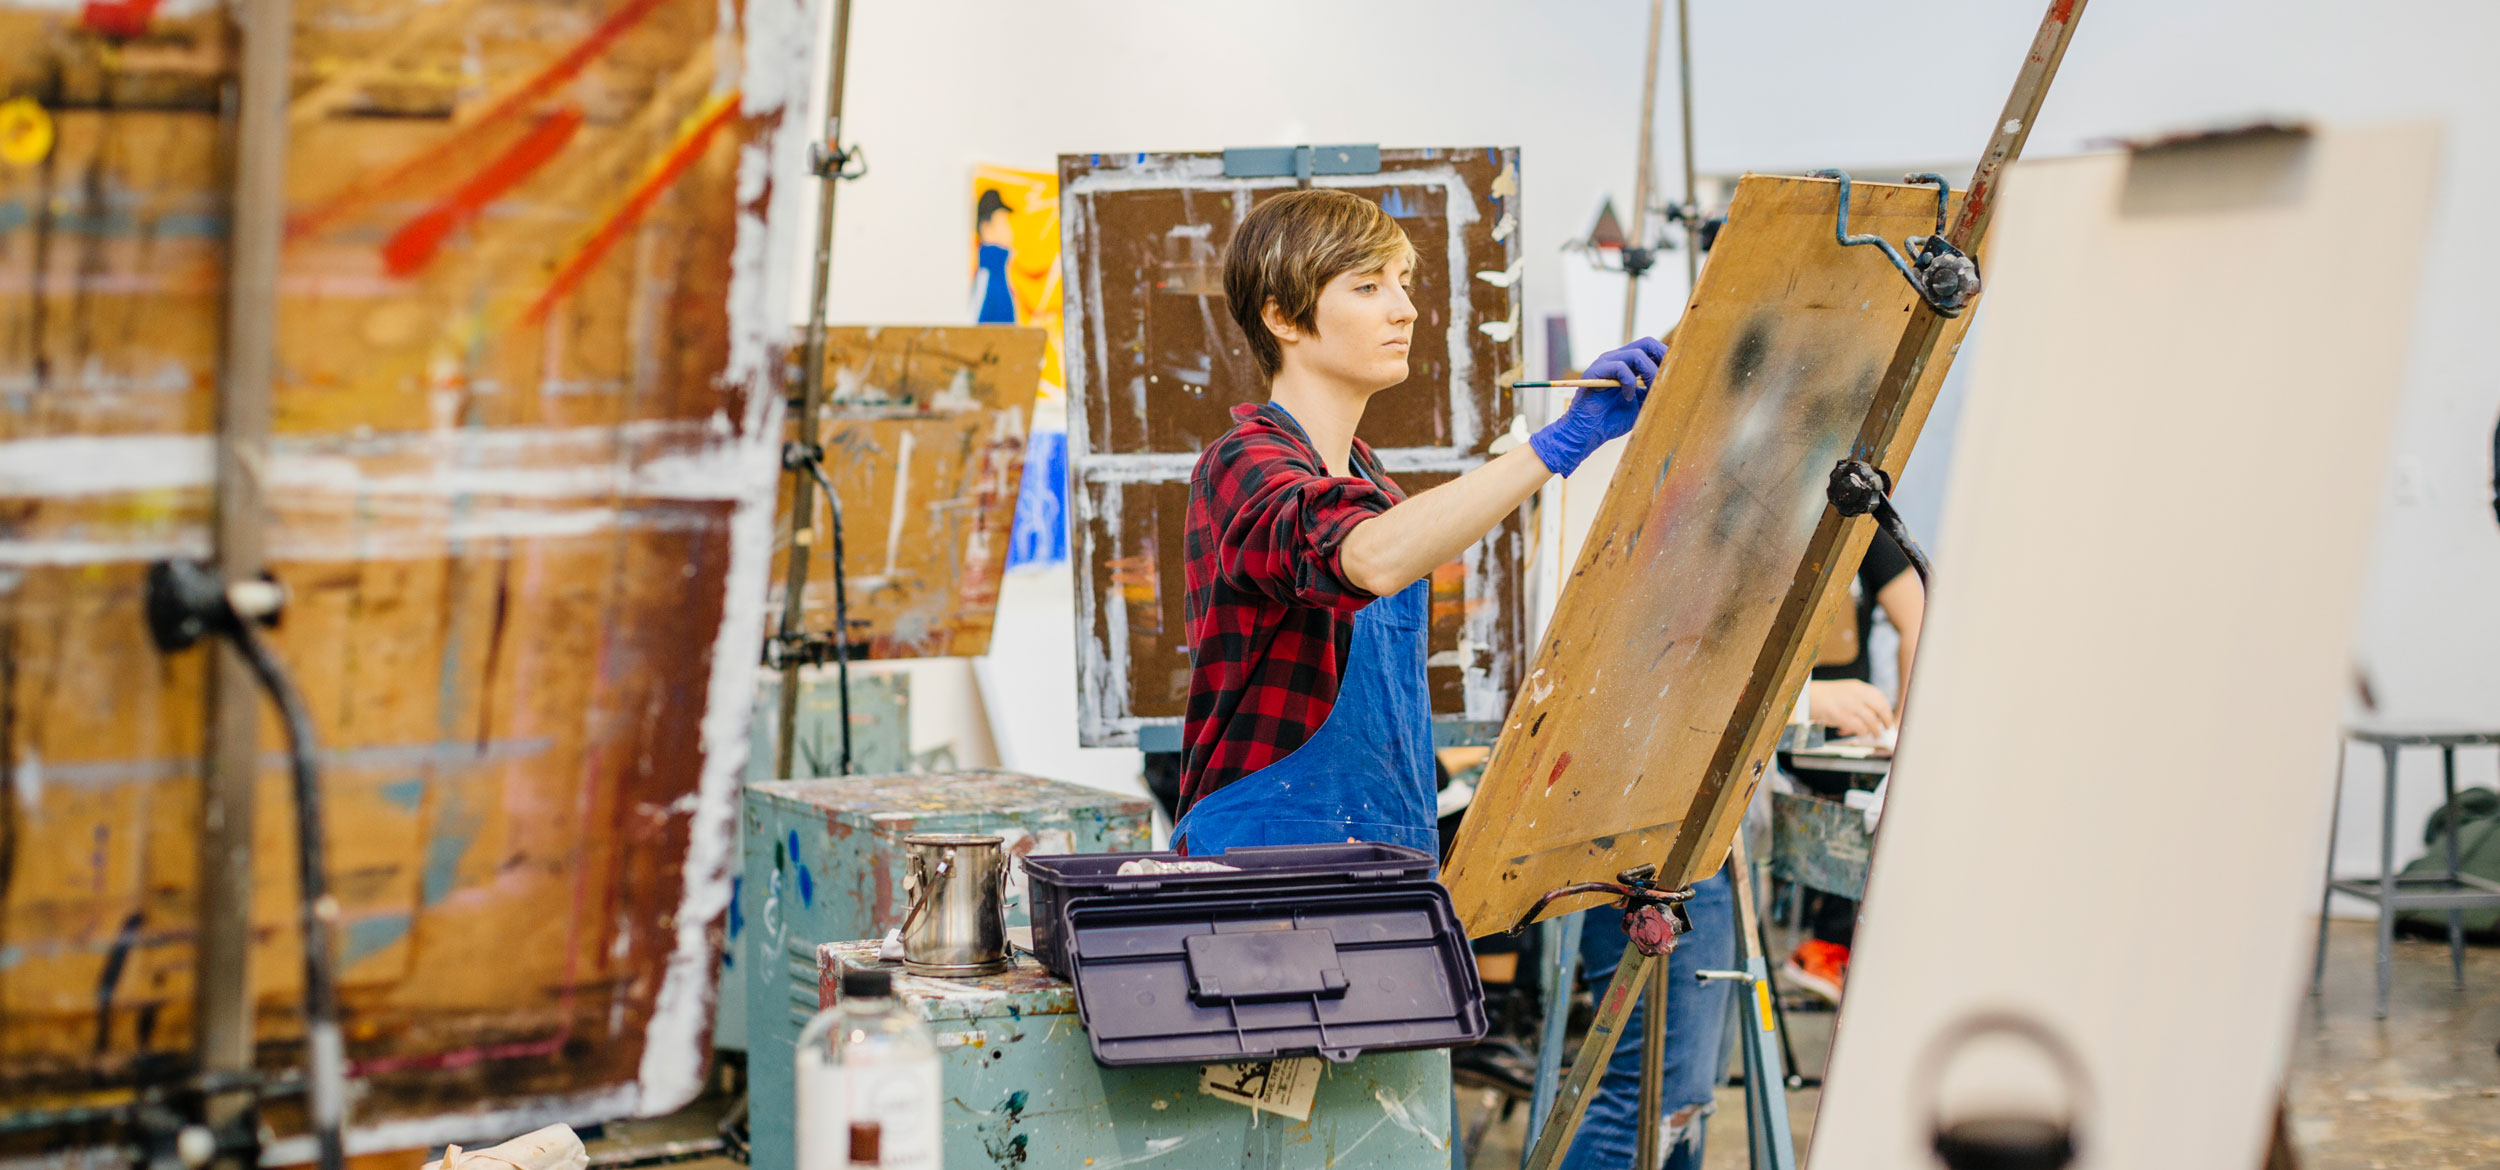 UC student practices painting techniques in an art studio. 